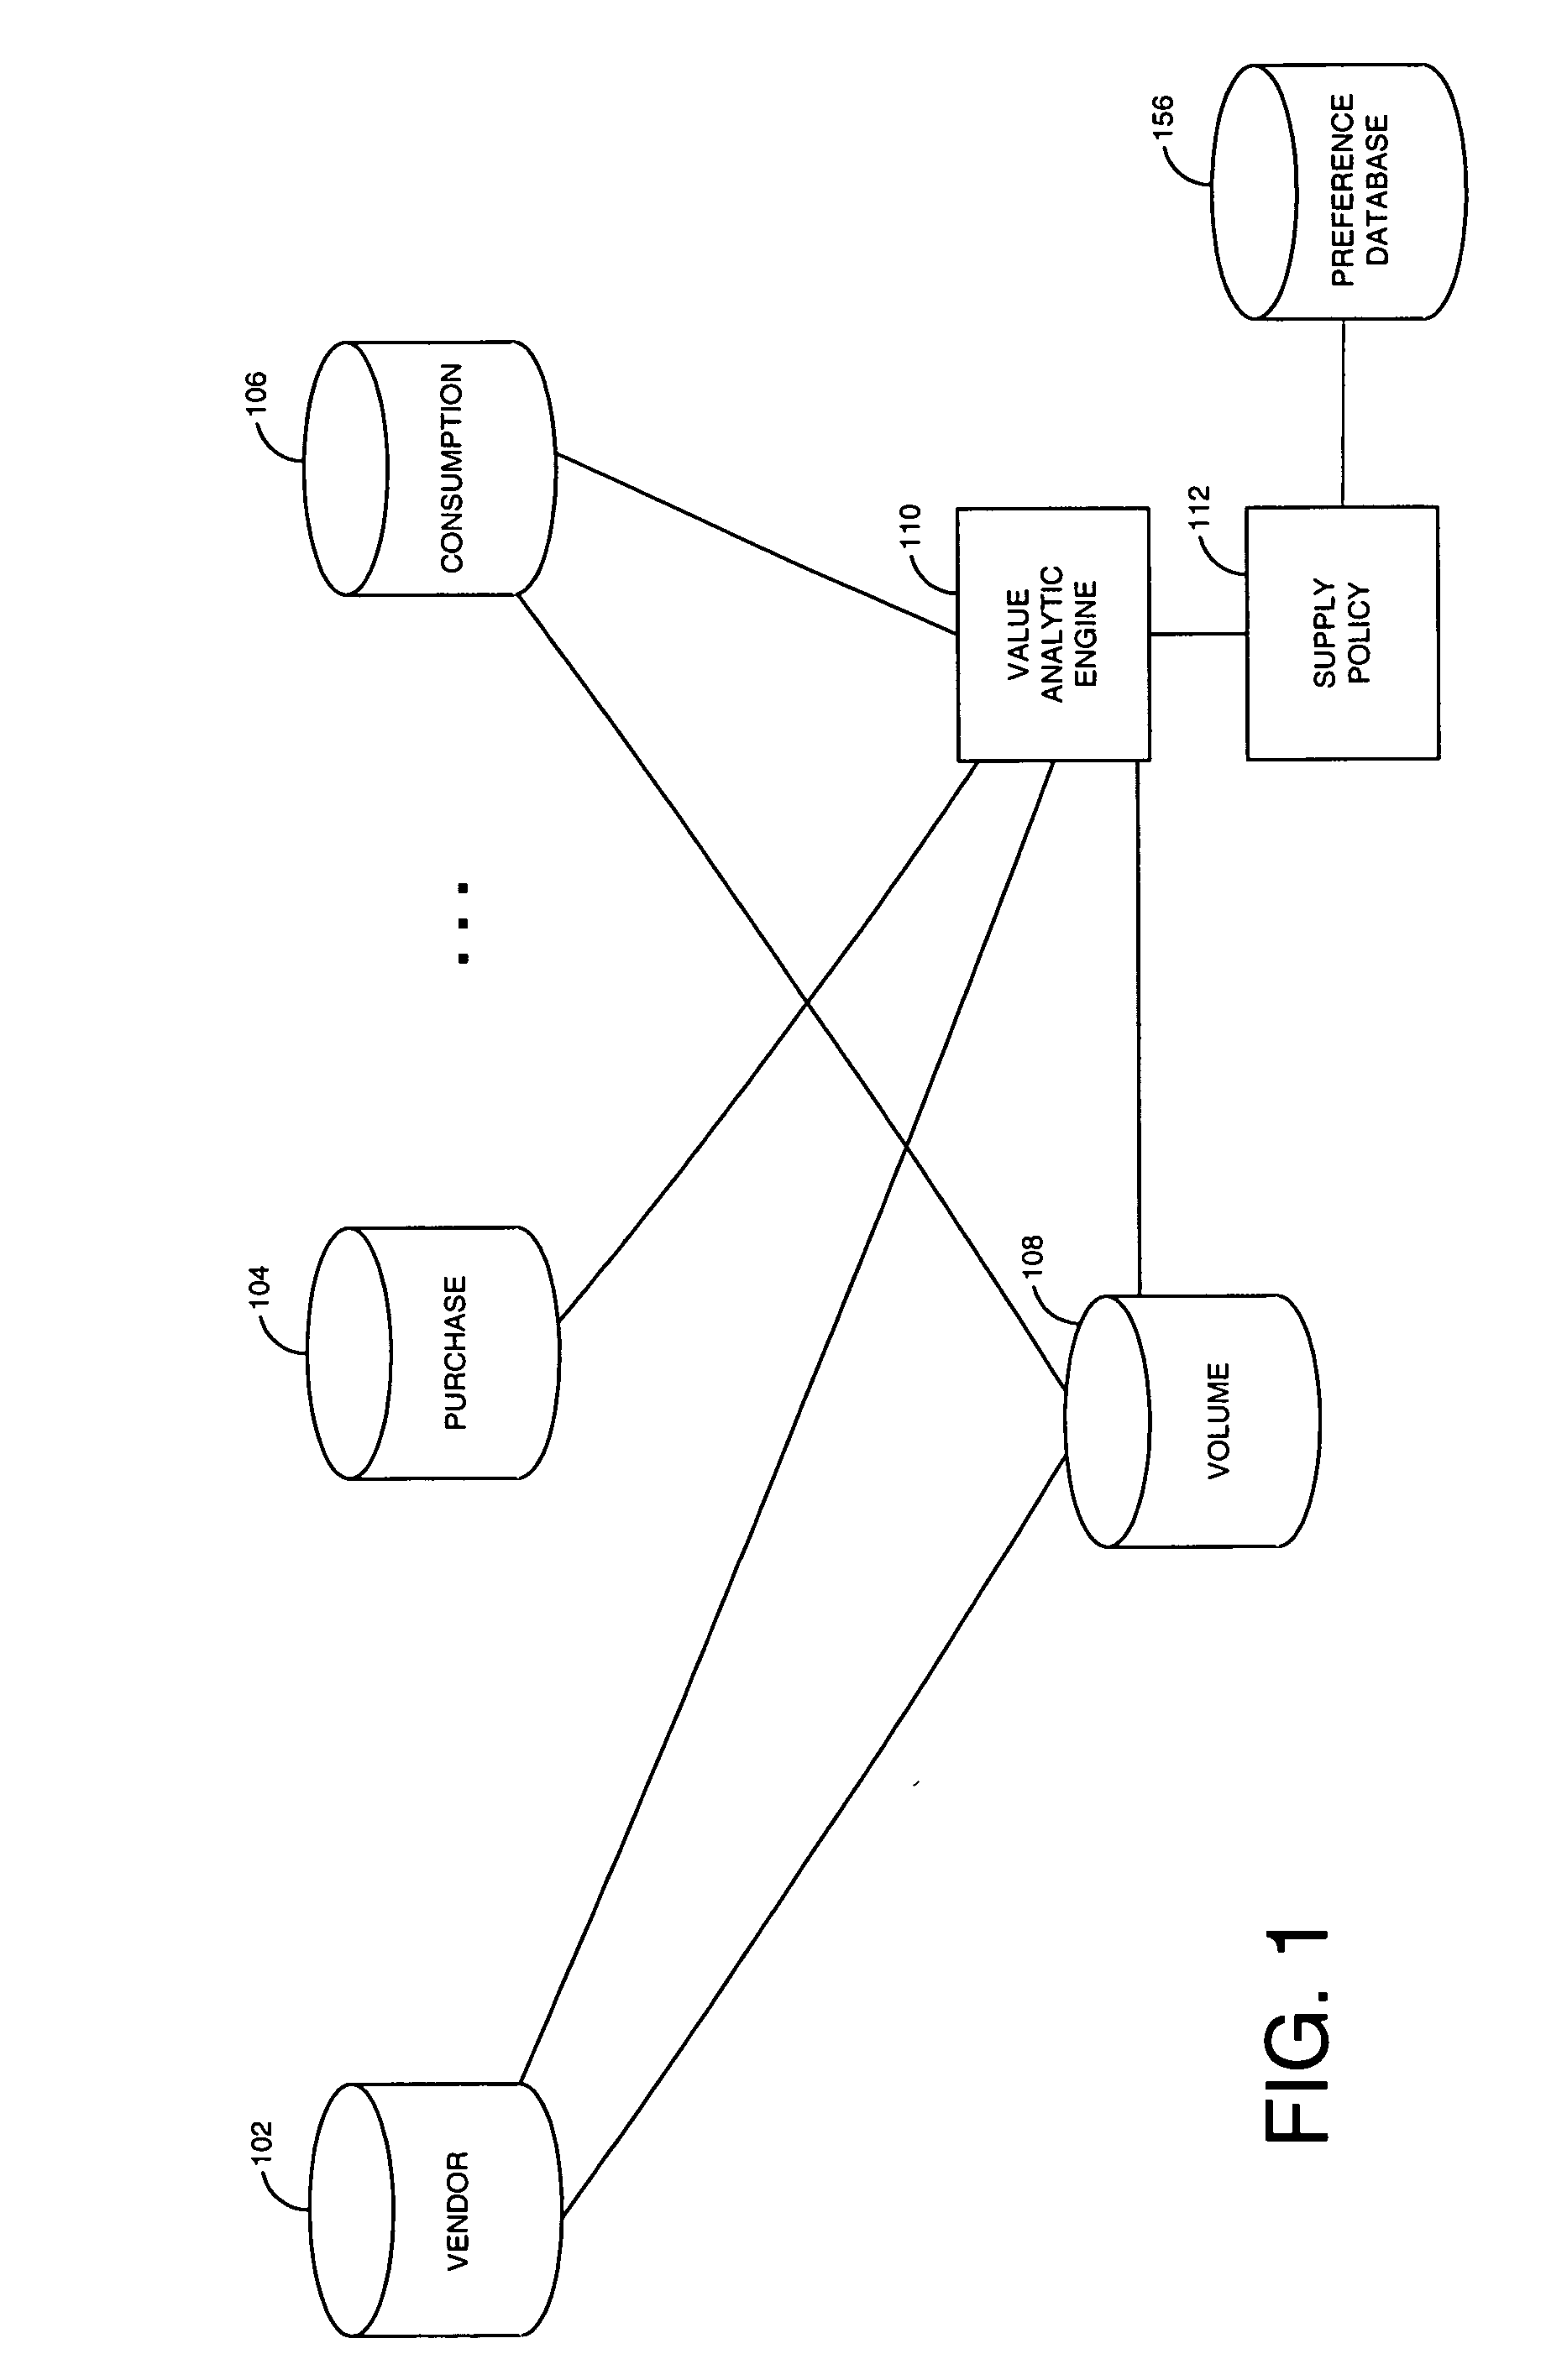 System and method for management of clinical supply operations